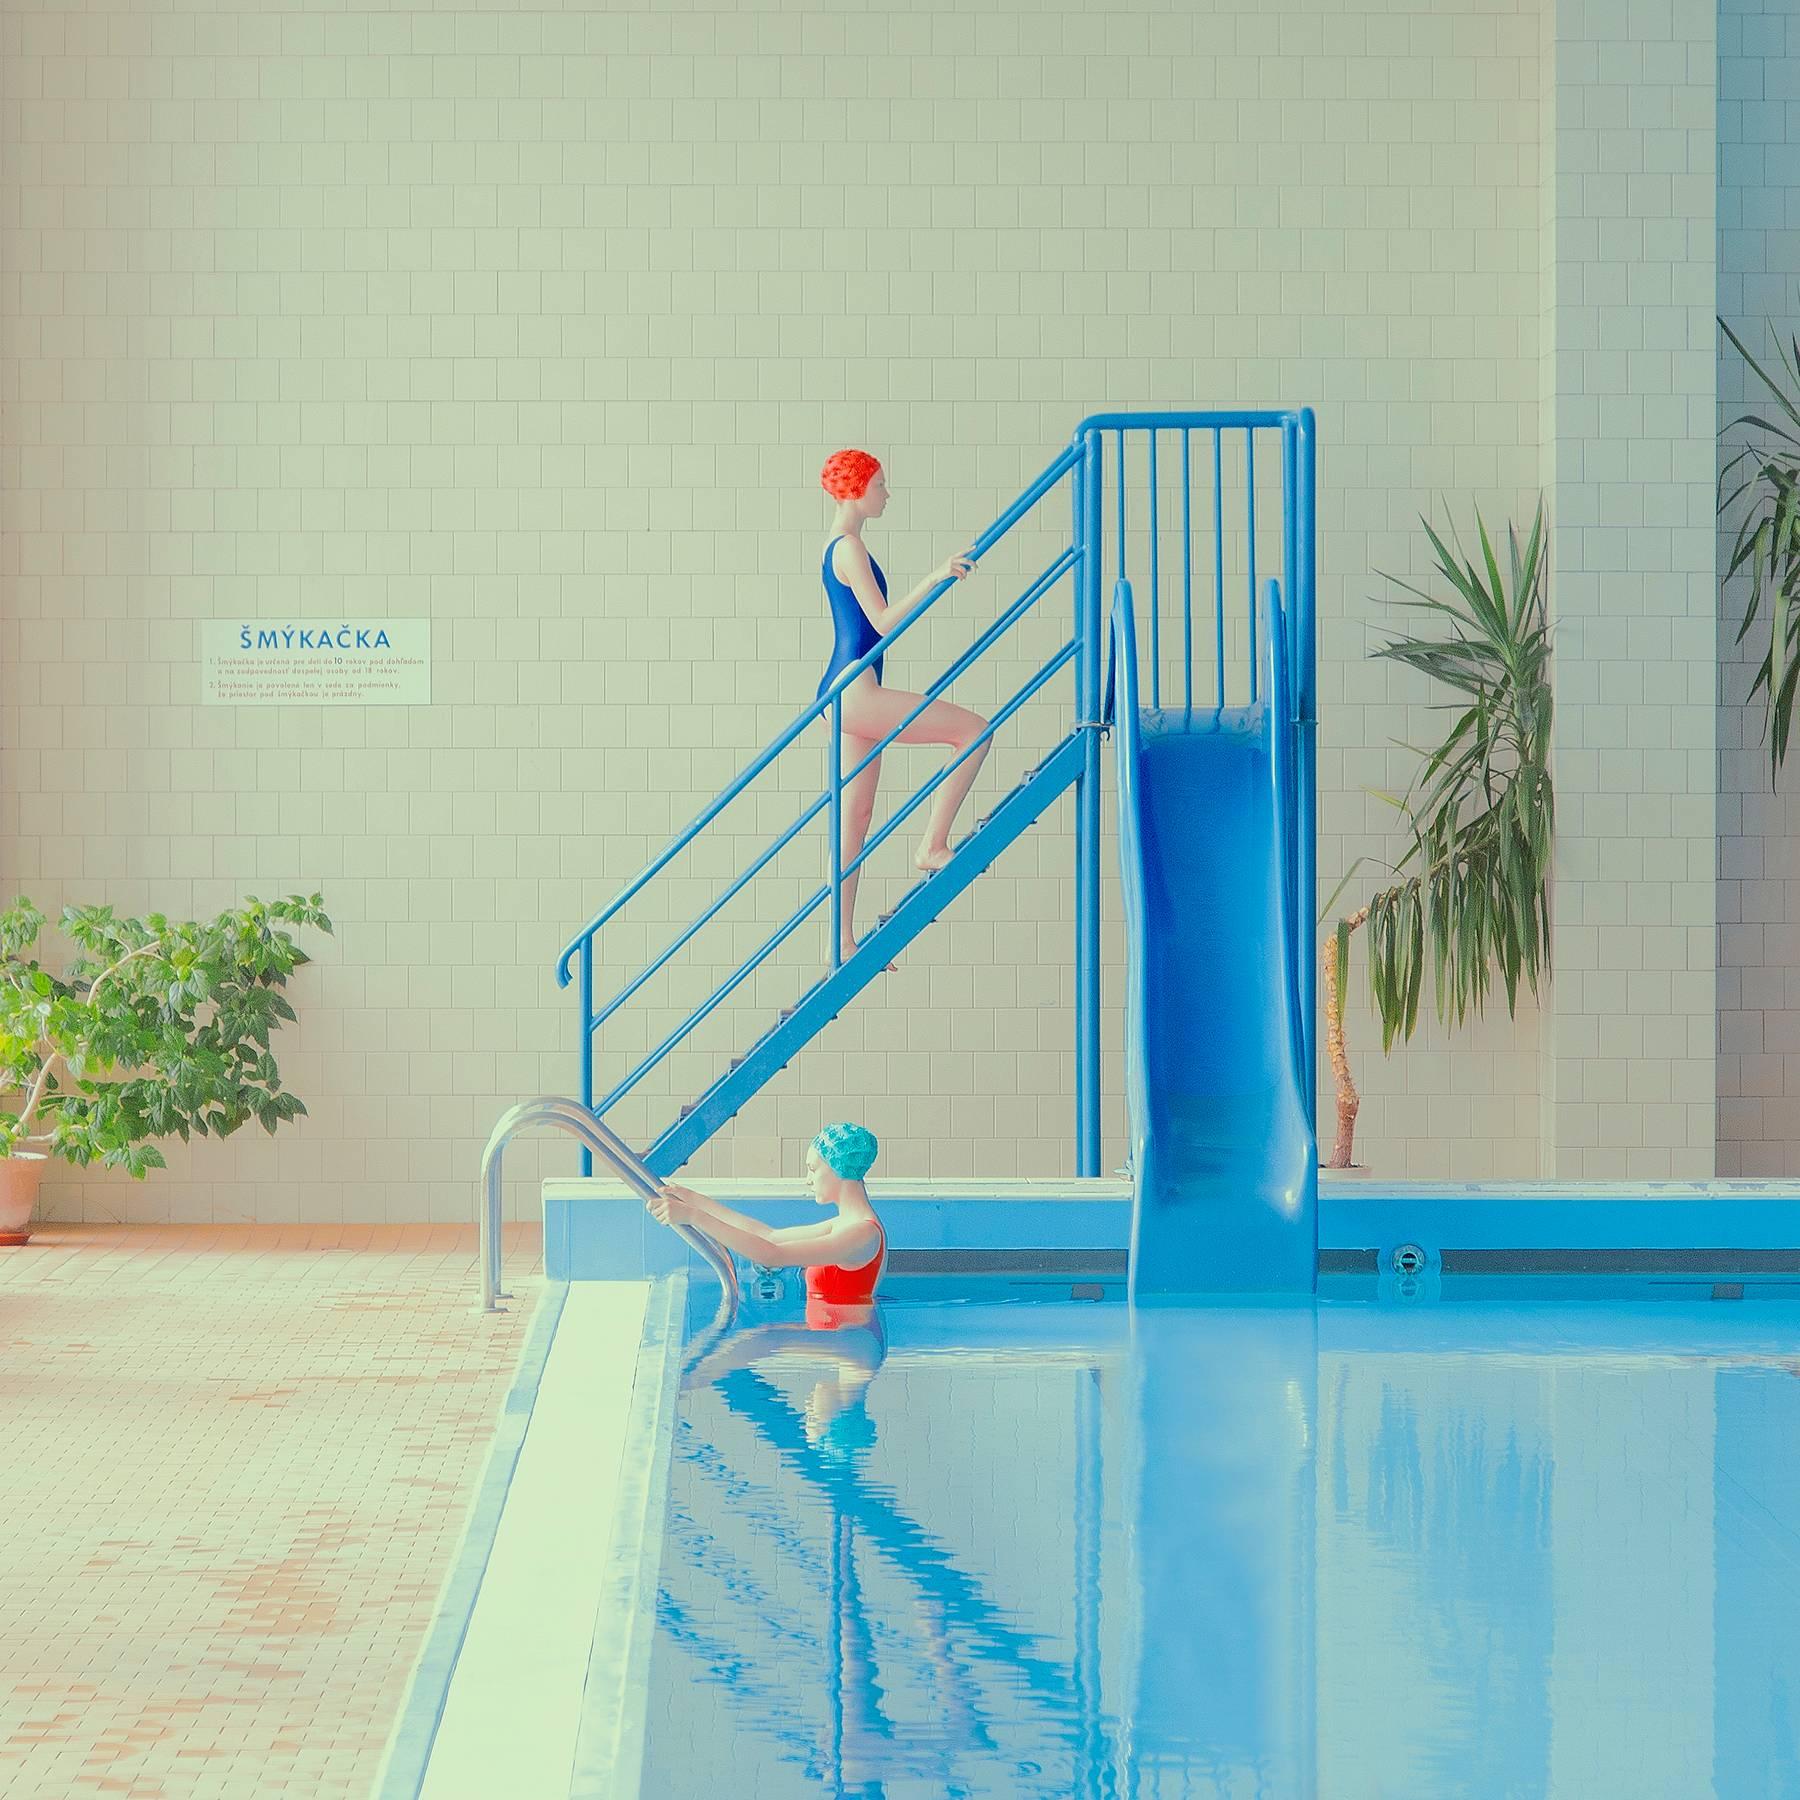 Maria Svarbova Color Photograph - Smykacka (Slide)- 27 x 27 inch muted colors swimming pool photograph